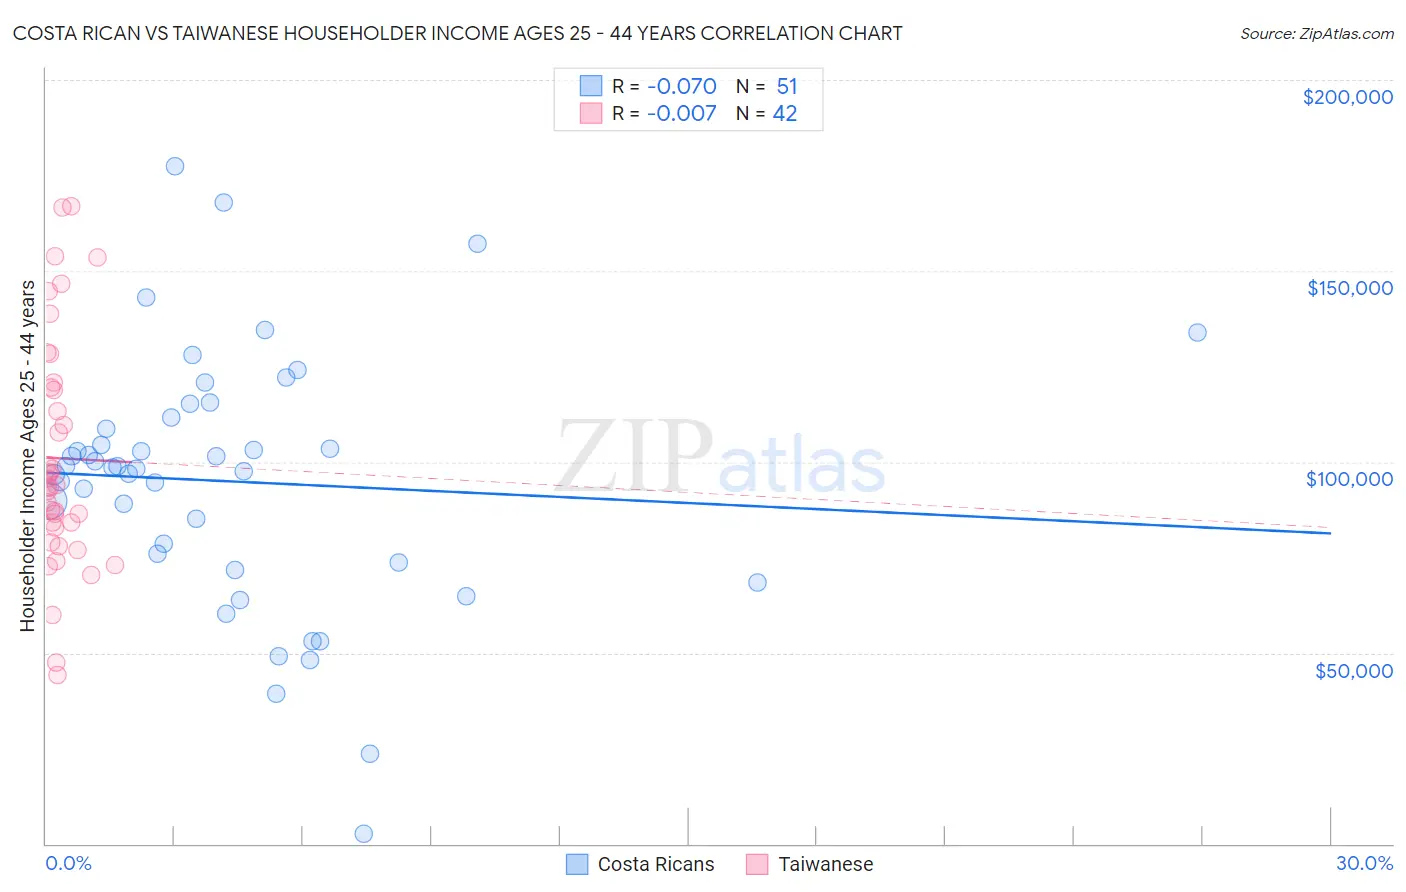 Costa Rican vs Taiwanese Householder Income Ages 25 - 44 years